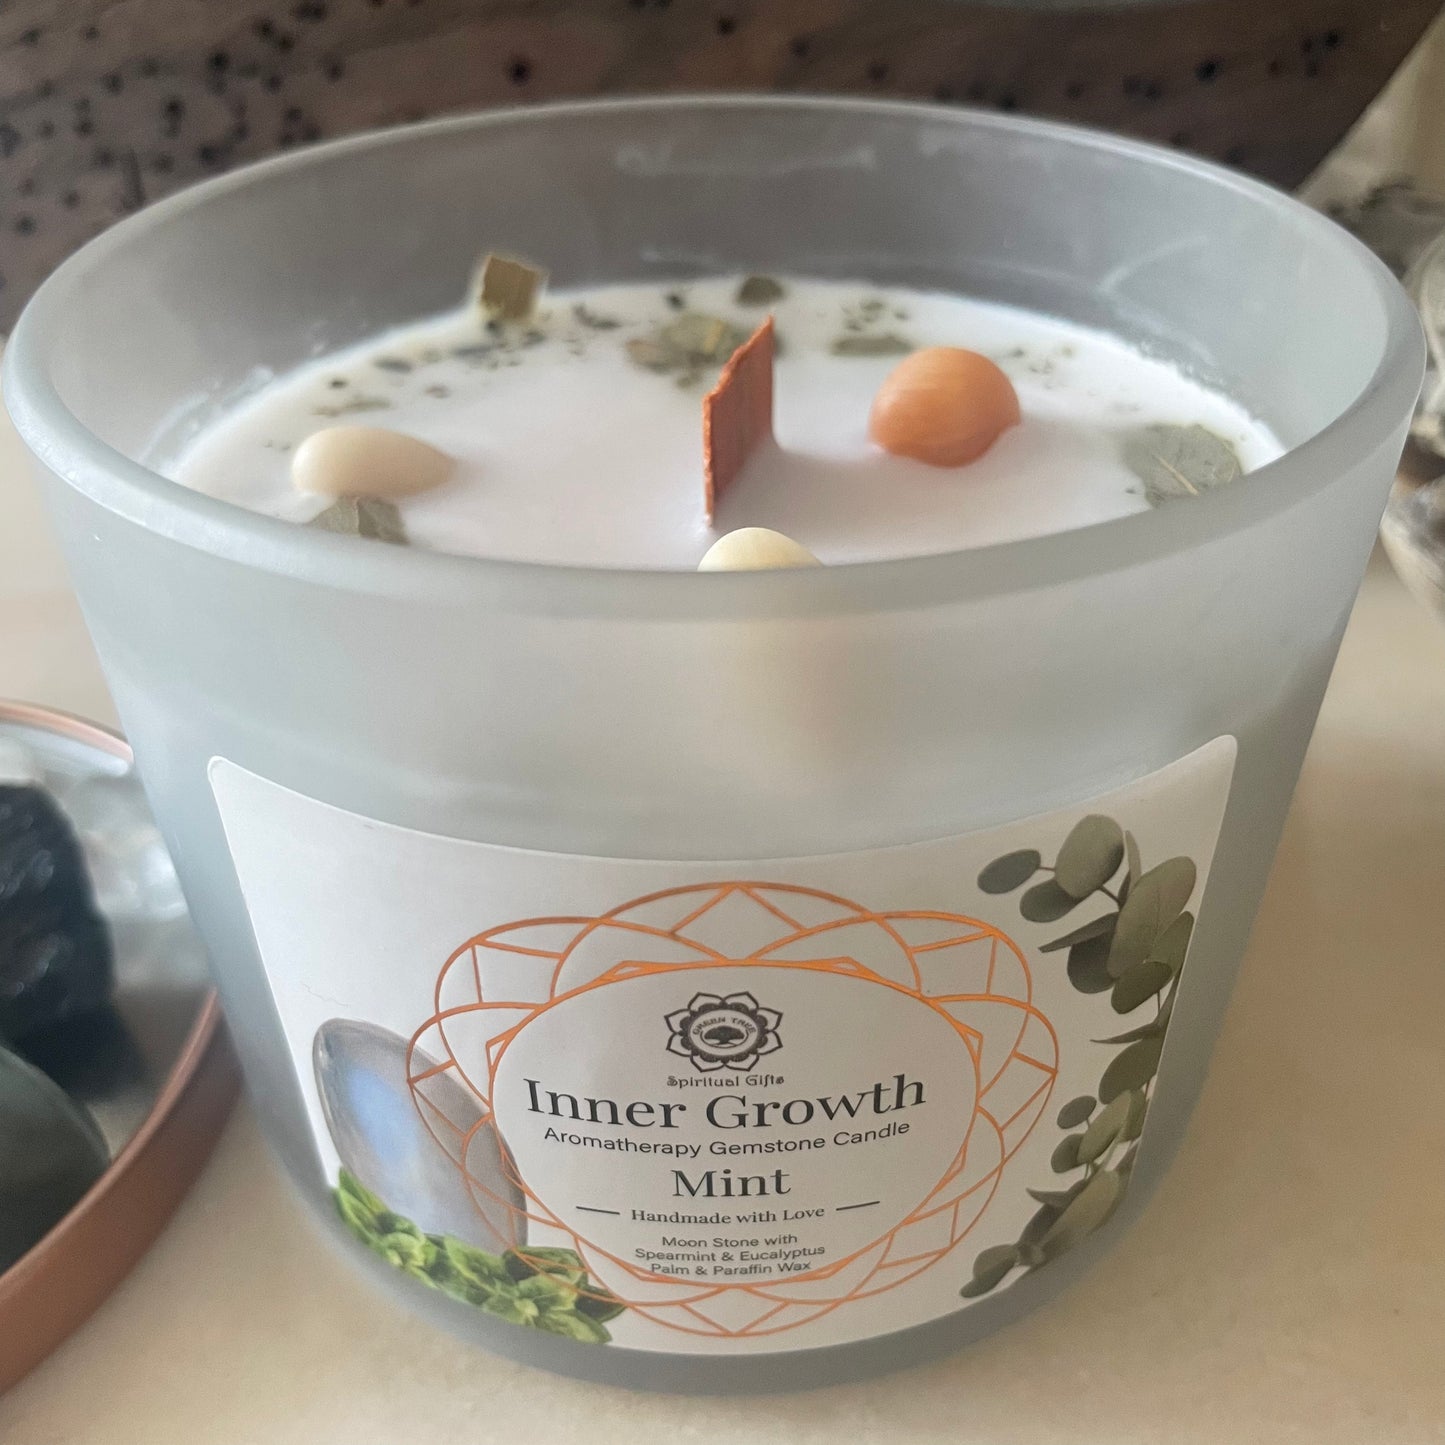 Mint and Moonstone Crystal Candle - Inner Growth